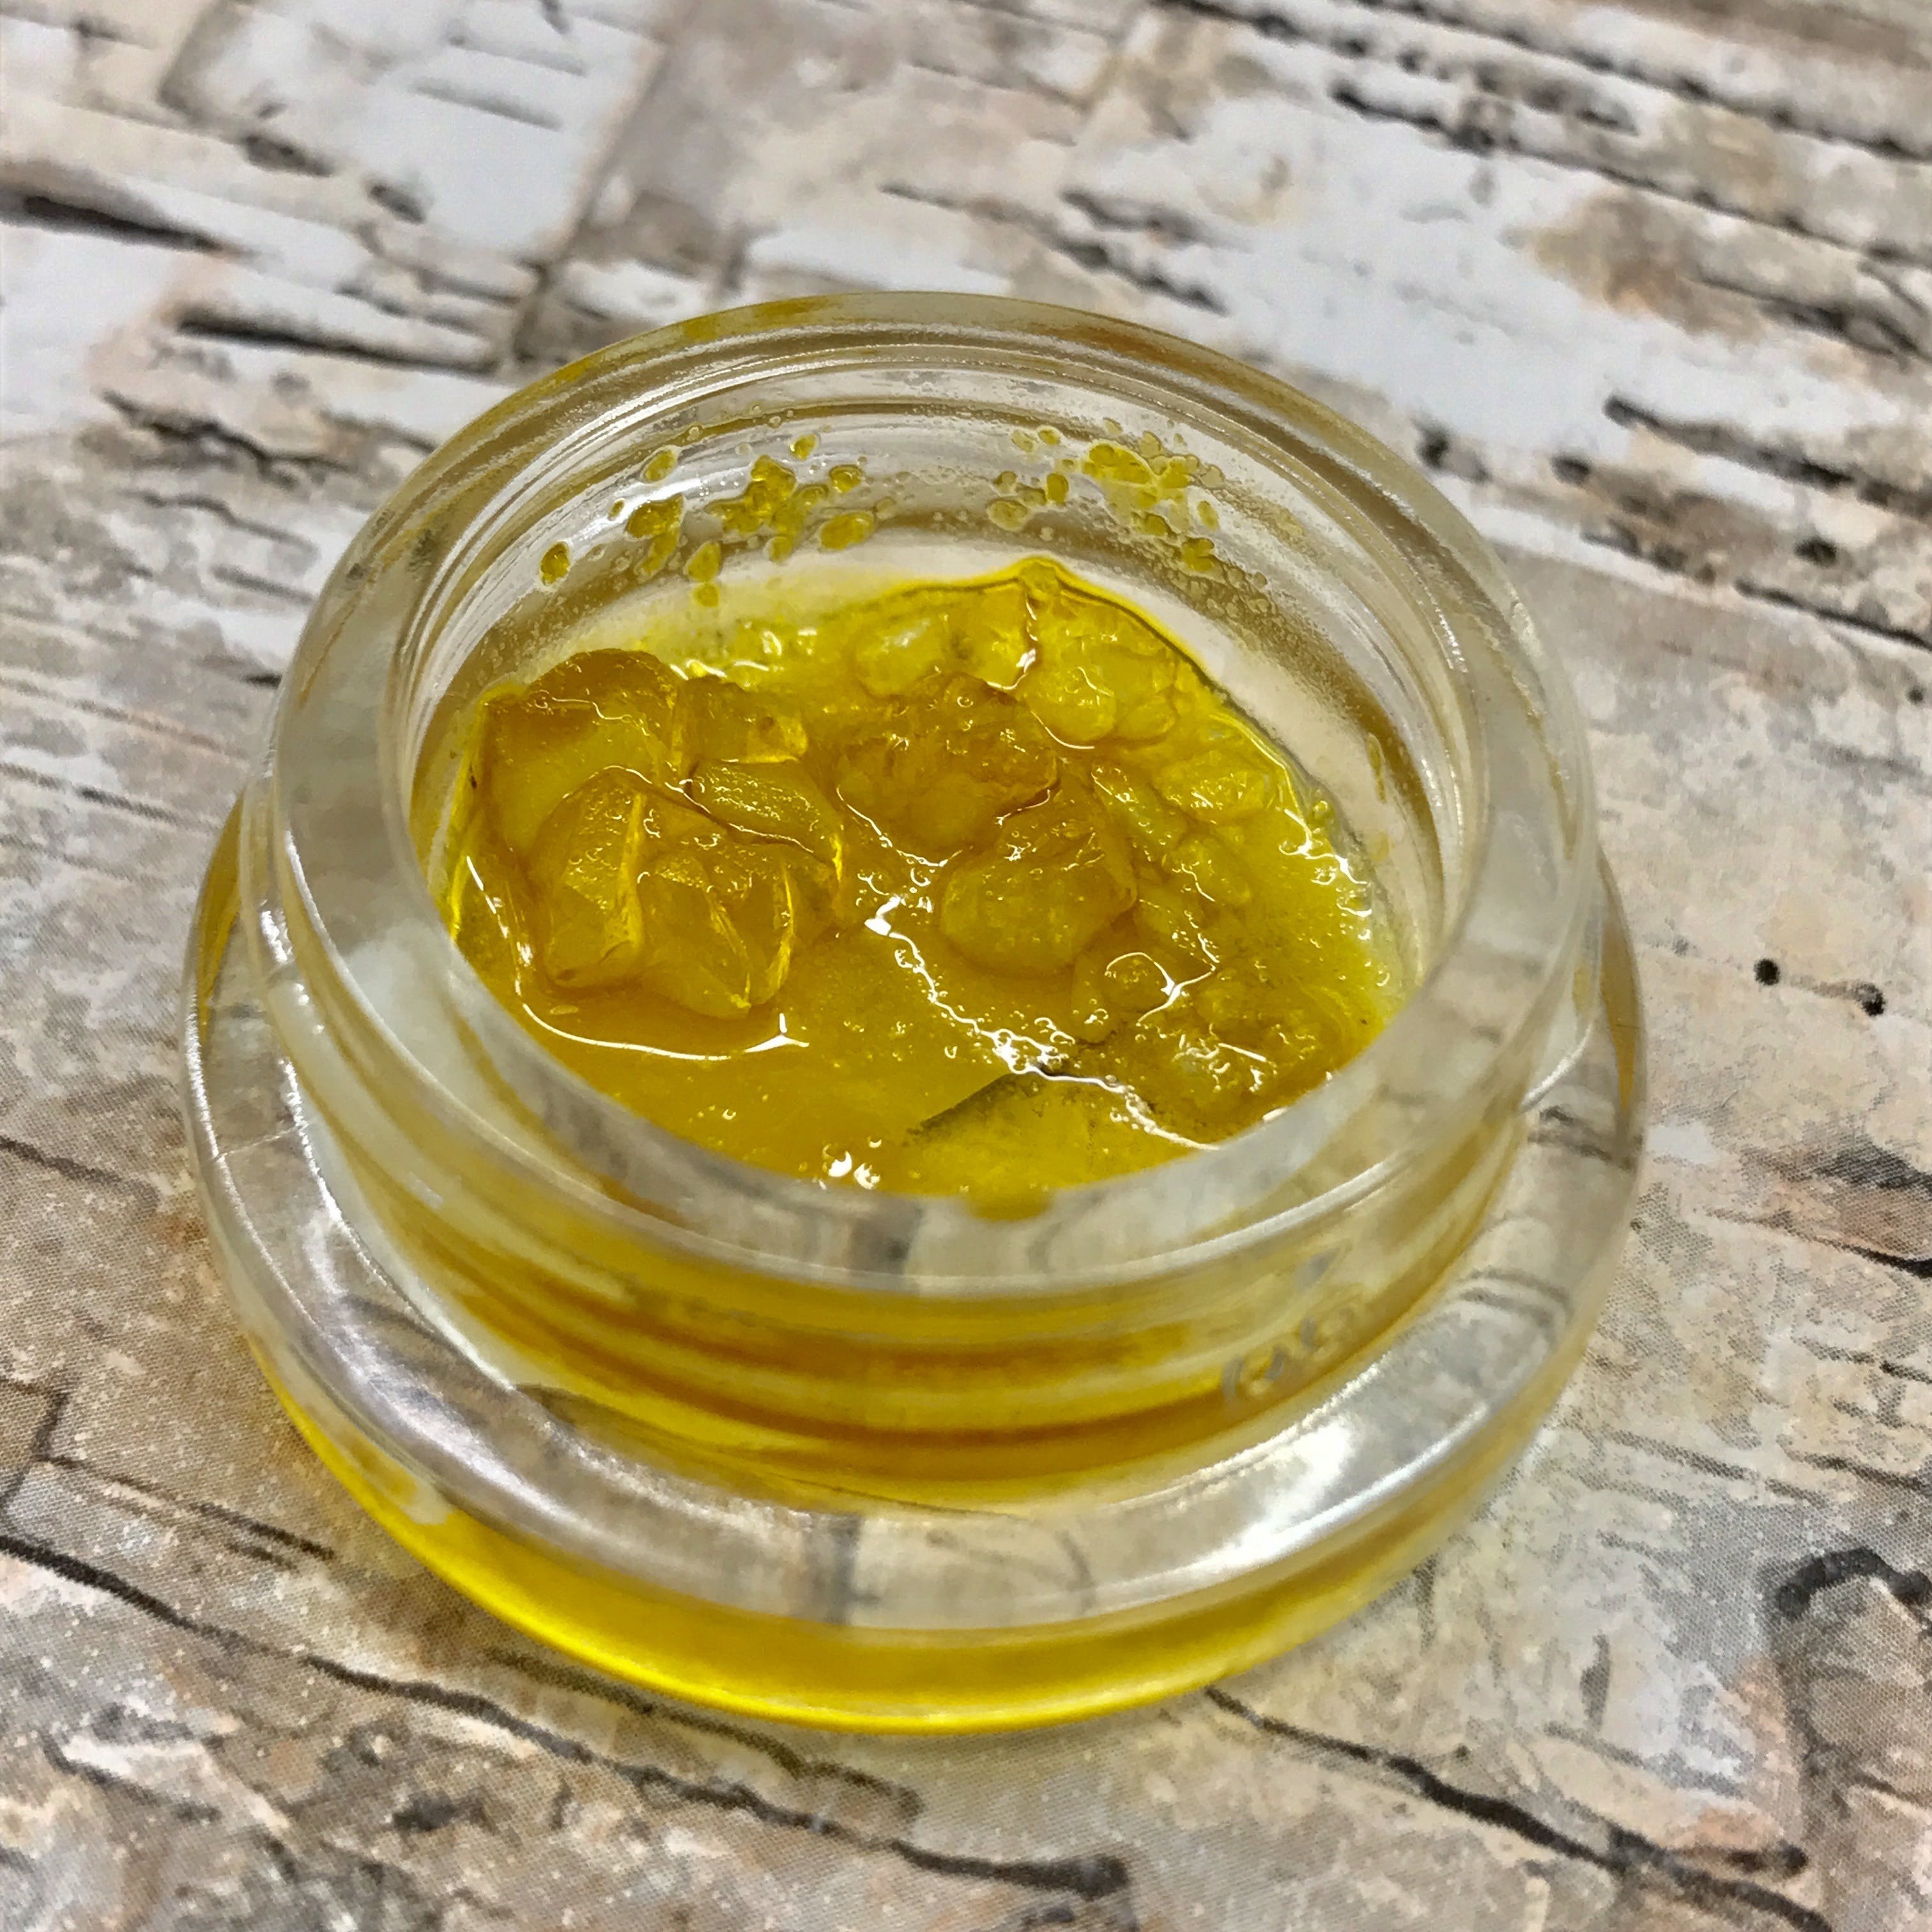 concentrate-sour-diesel-live-resin-diamonds